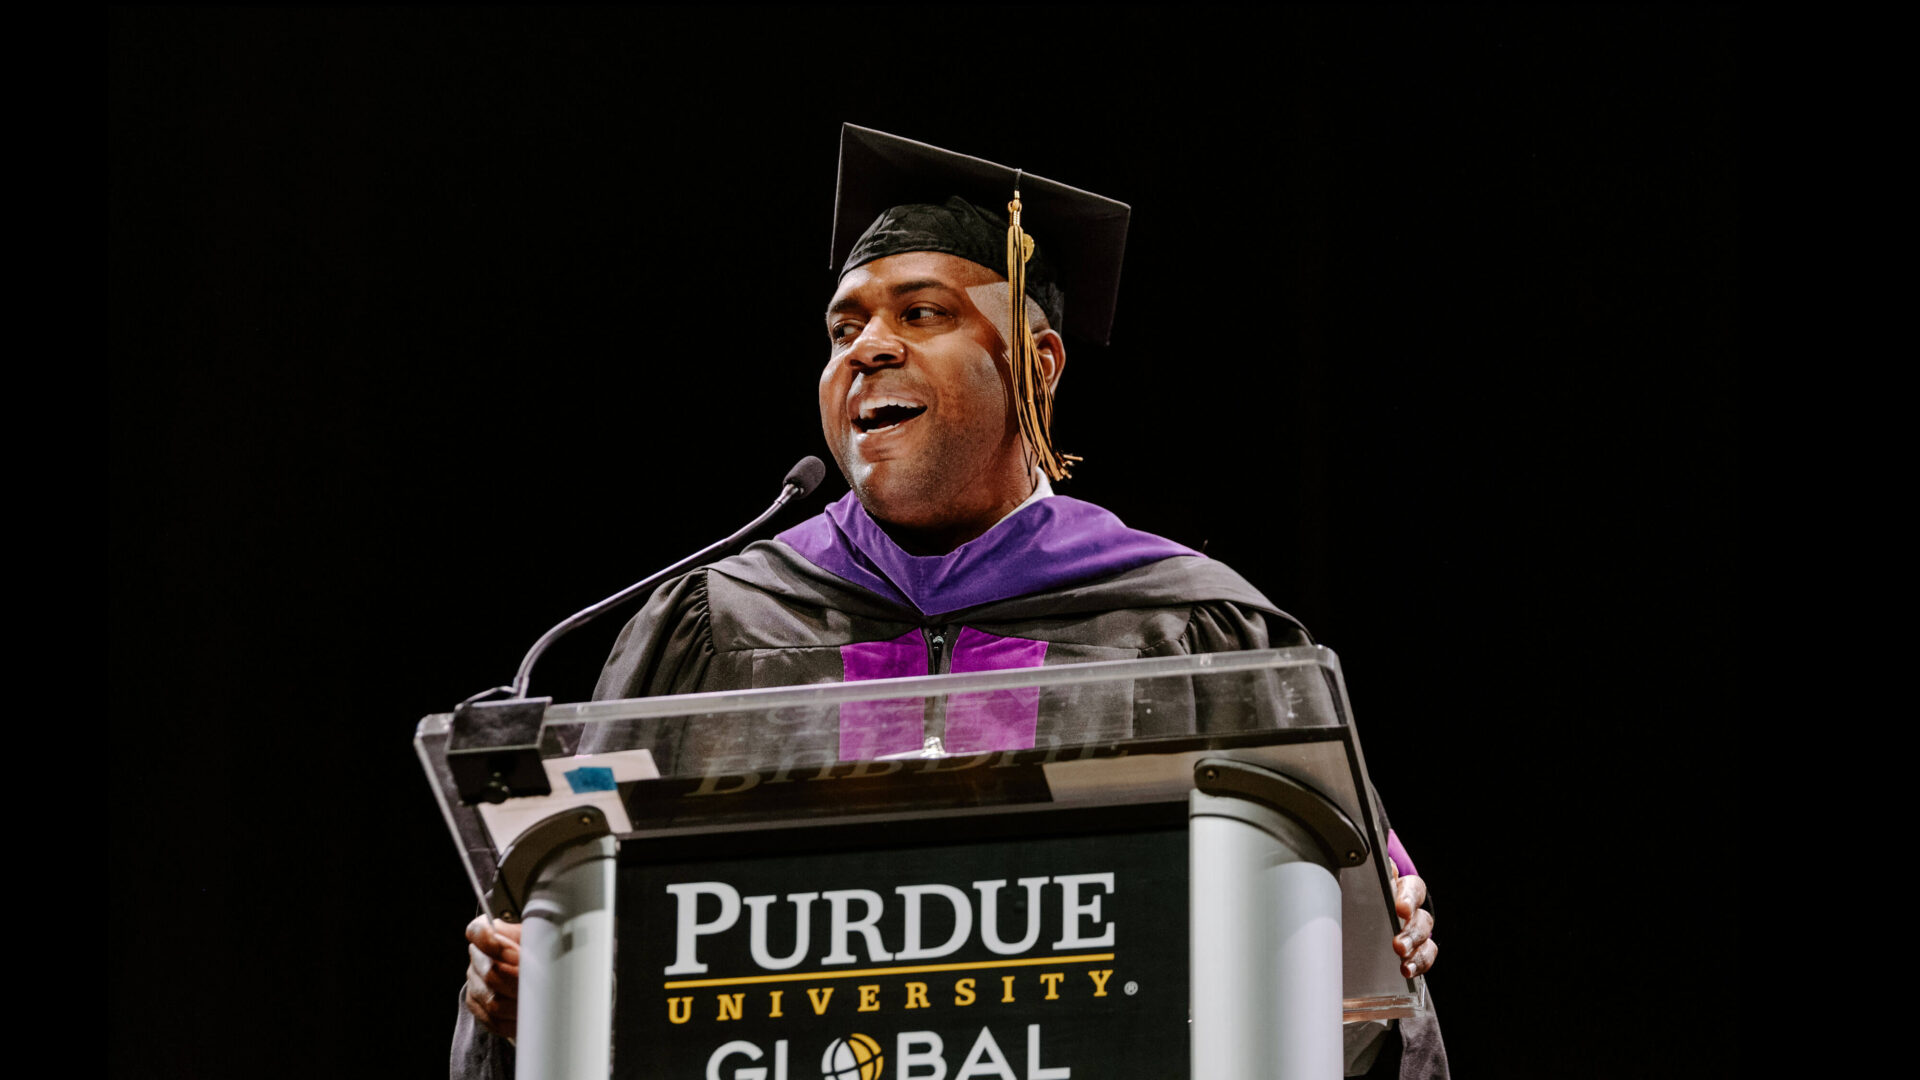 Dolan Williams stands at a Purdue Global lectern with commencement gown and regalia.